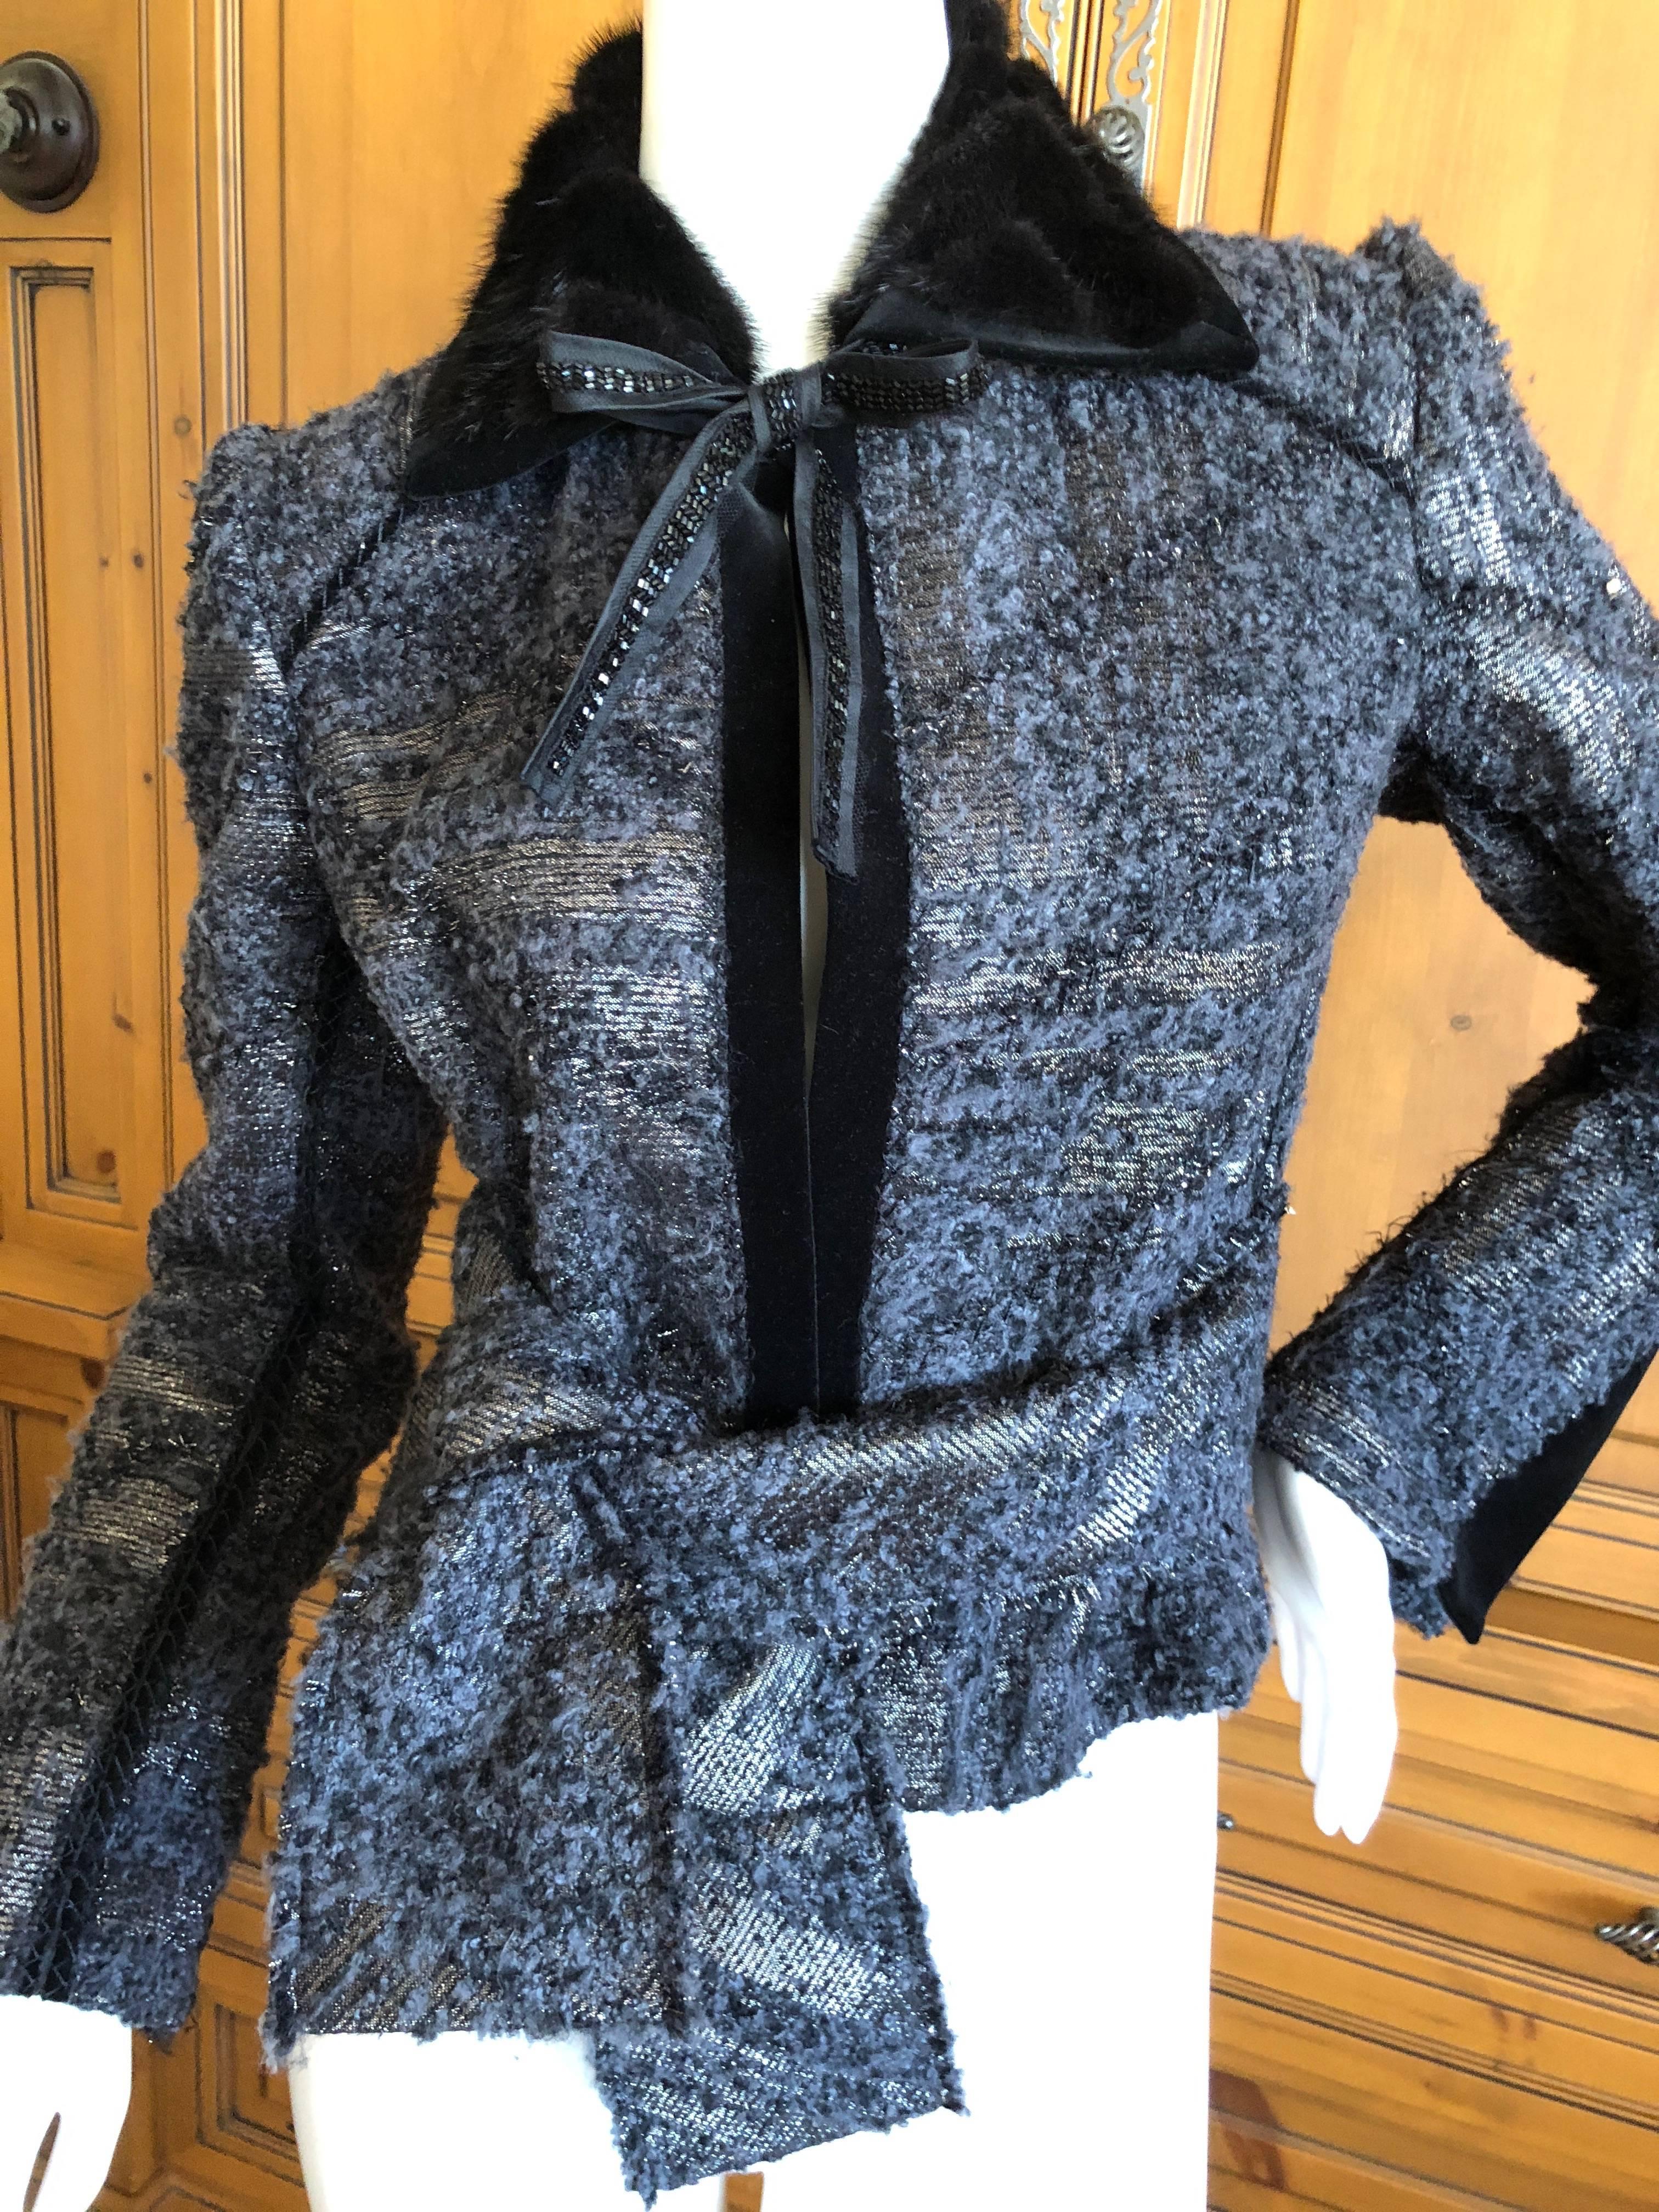 J. Mendel Paris Bead Embellished Tweed Belted Jacket with Fur Collar and Belt In Excellent Condition For Sale In Cloverdale, CA